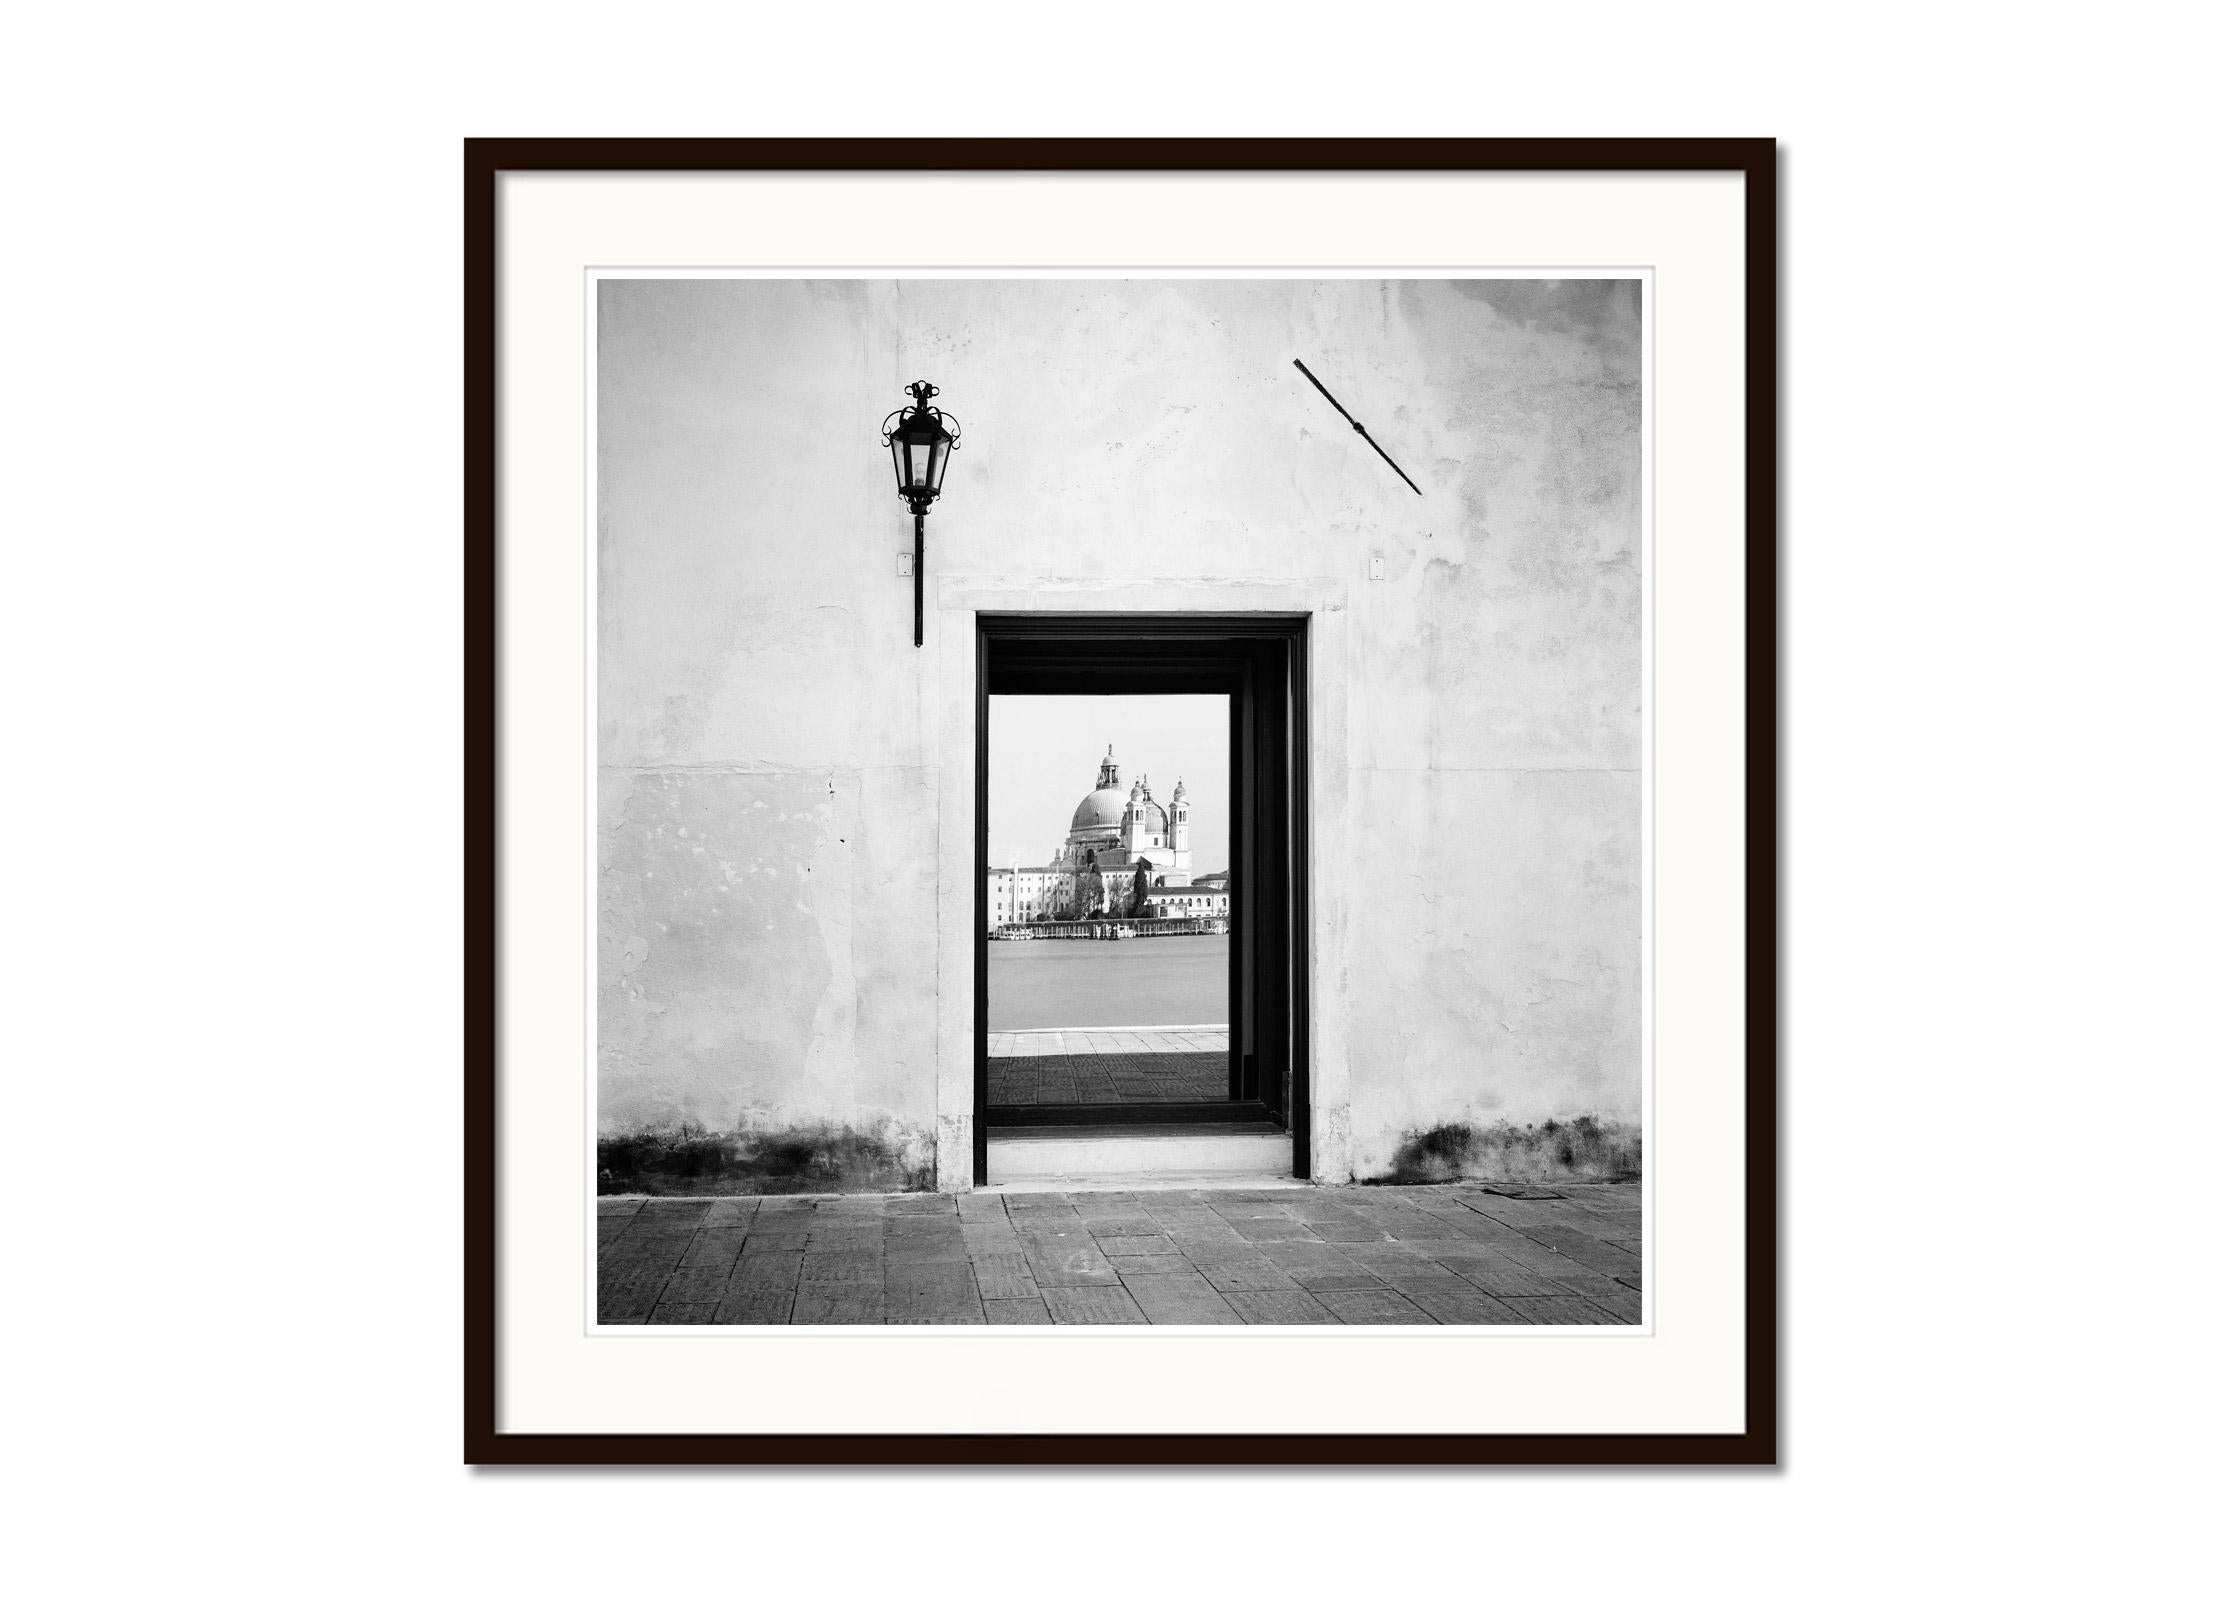 Reflection, Venice, Italy, black and white fine art landscape photography print - Gray Landscape Photograph by Gerald Berghammer